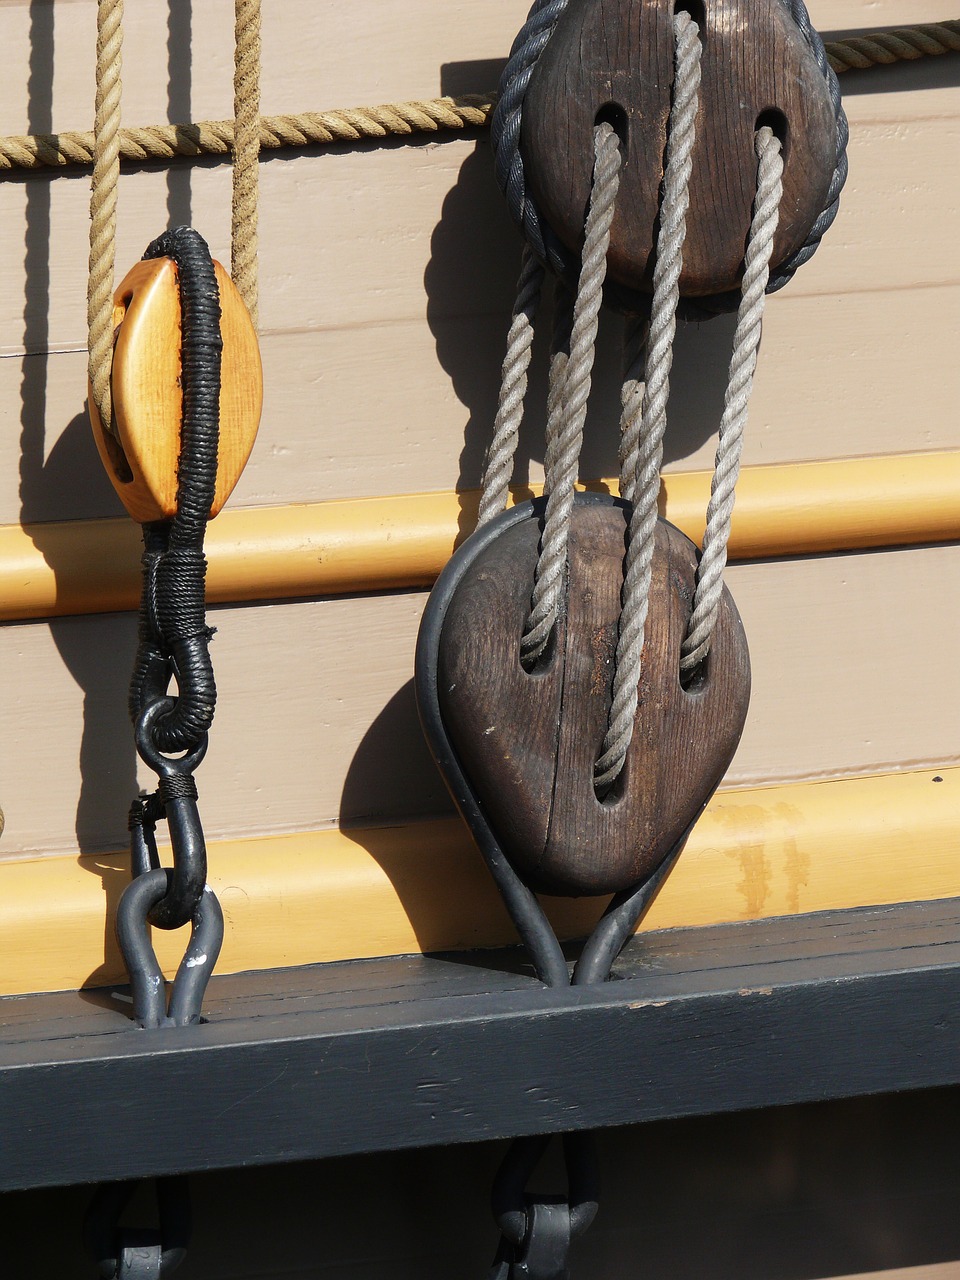 Pulley,pirate,ship,rope,boat - free image from